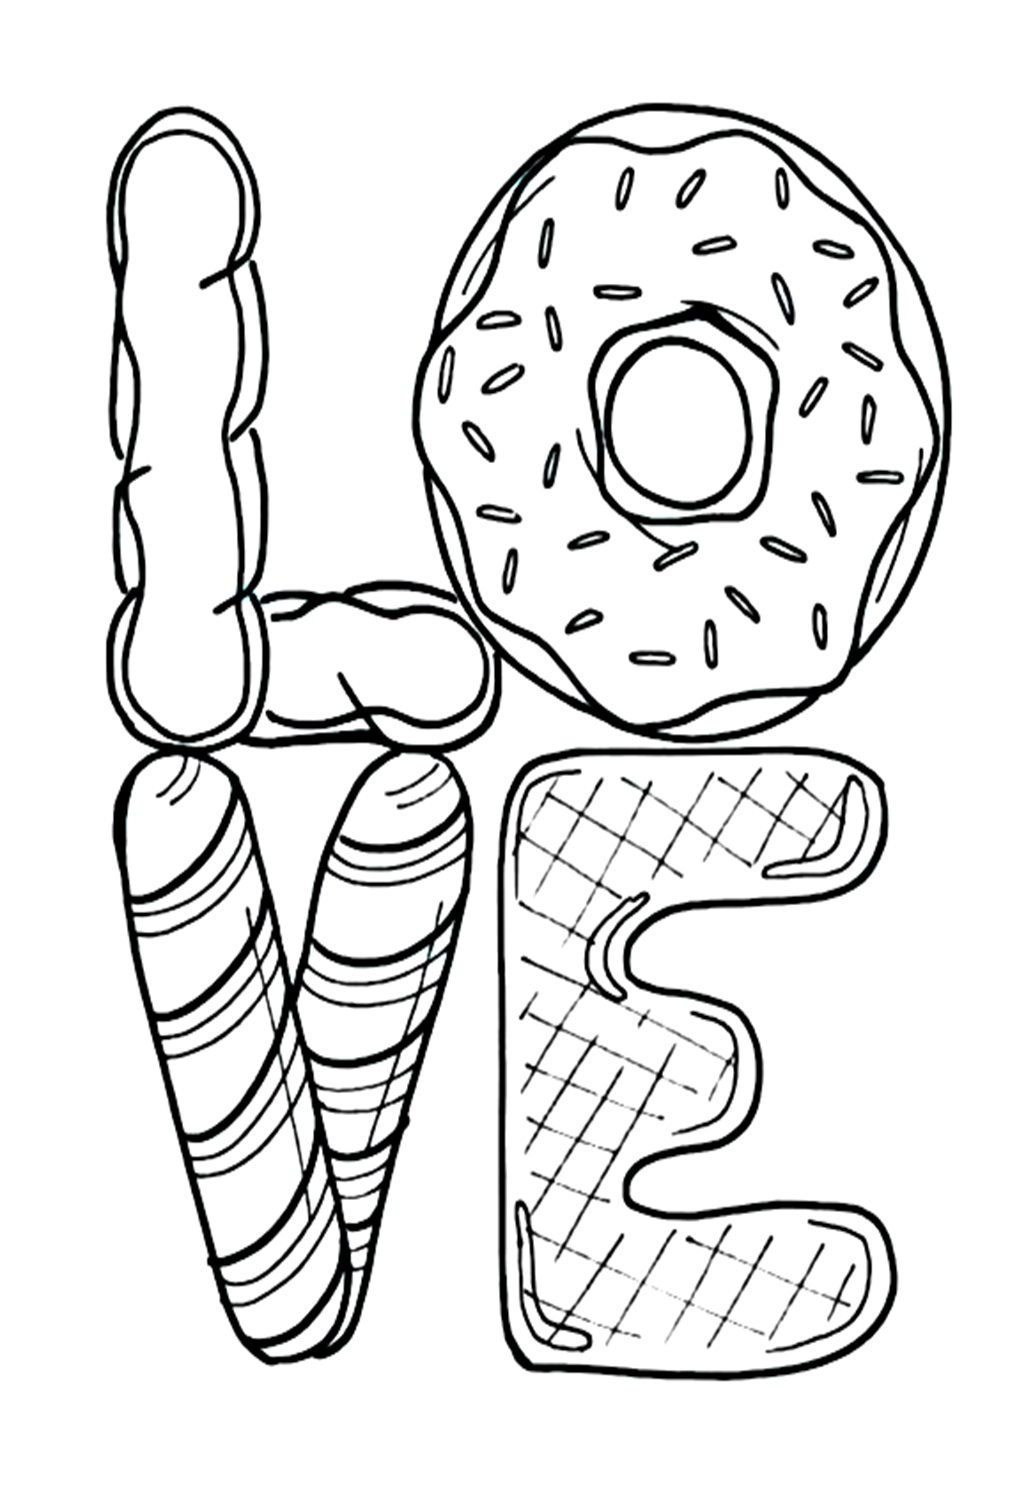 Donut For Coloring from Donut